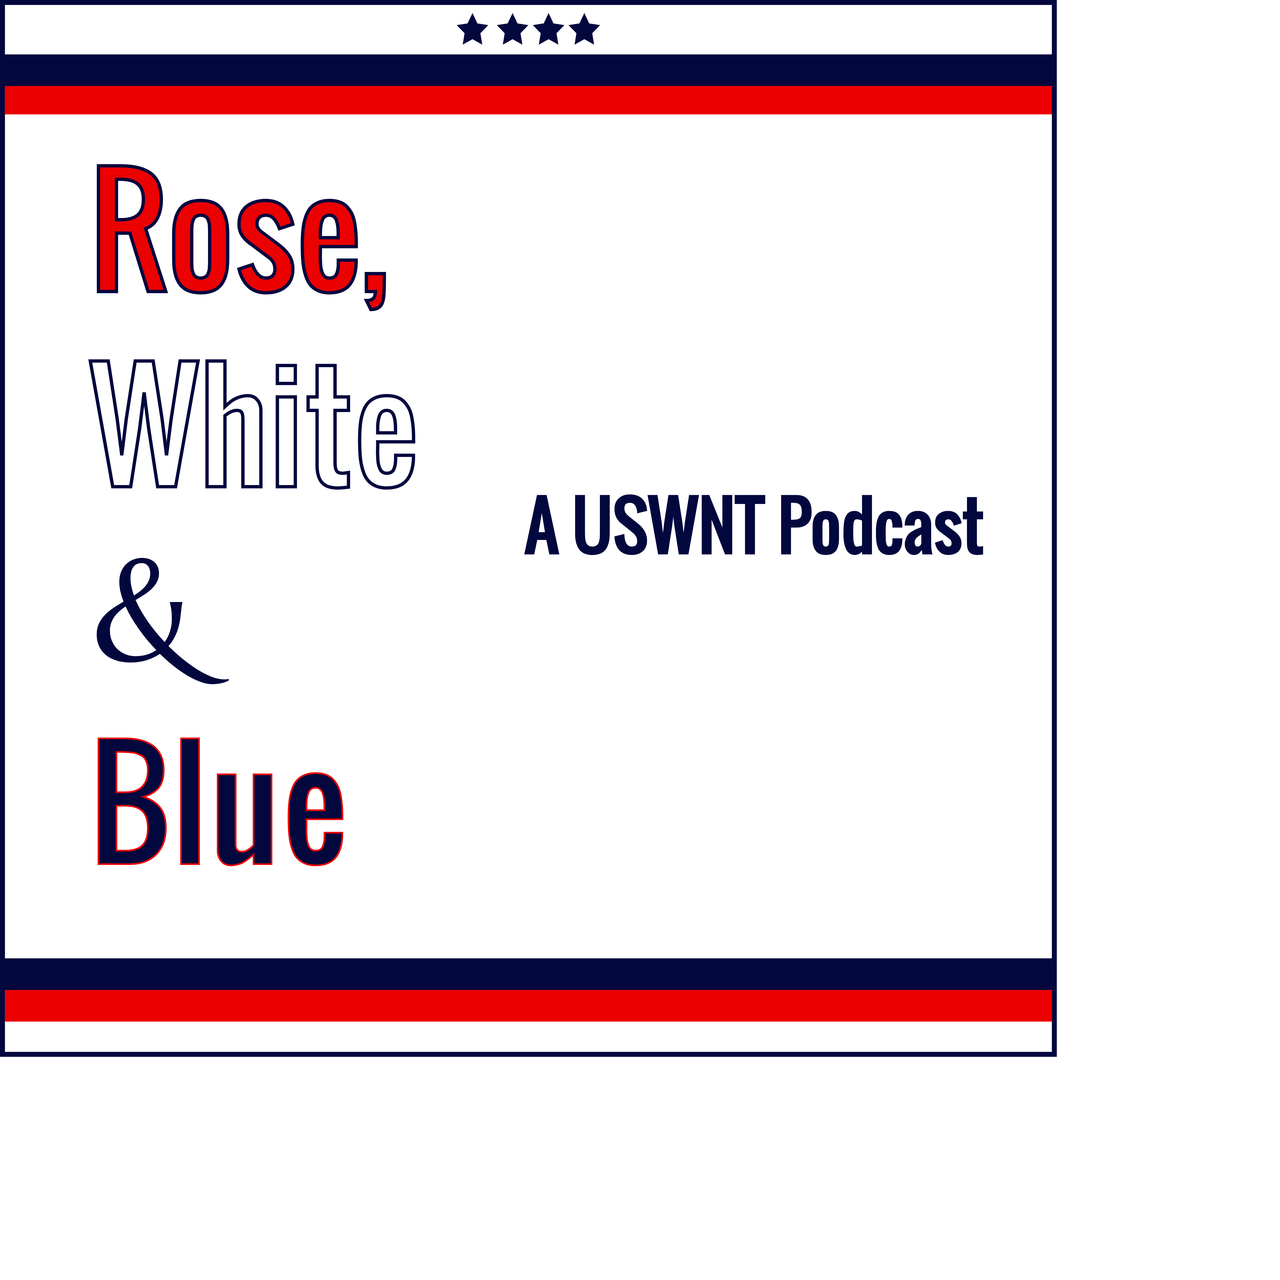 Rose, White & Blue: A USWNT Podcast